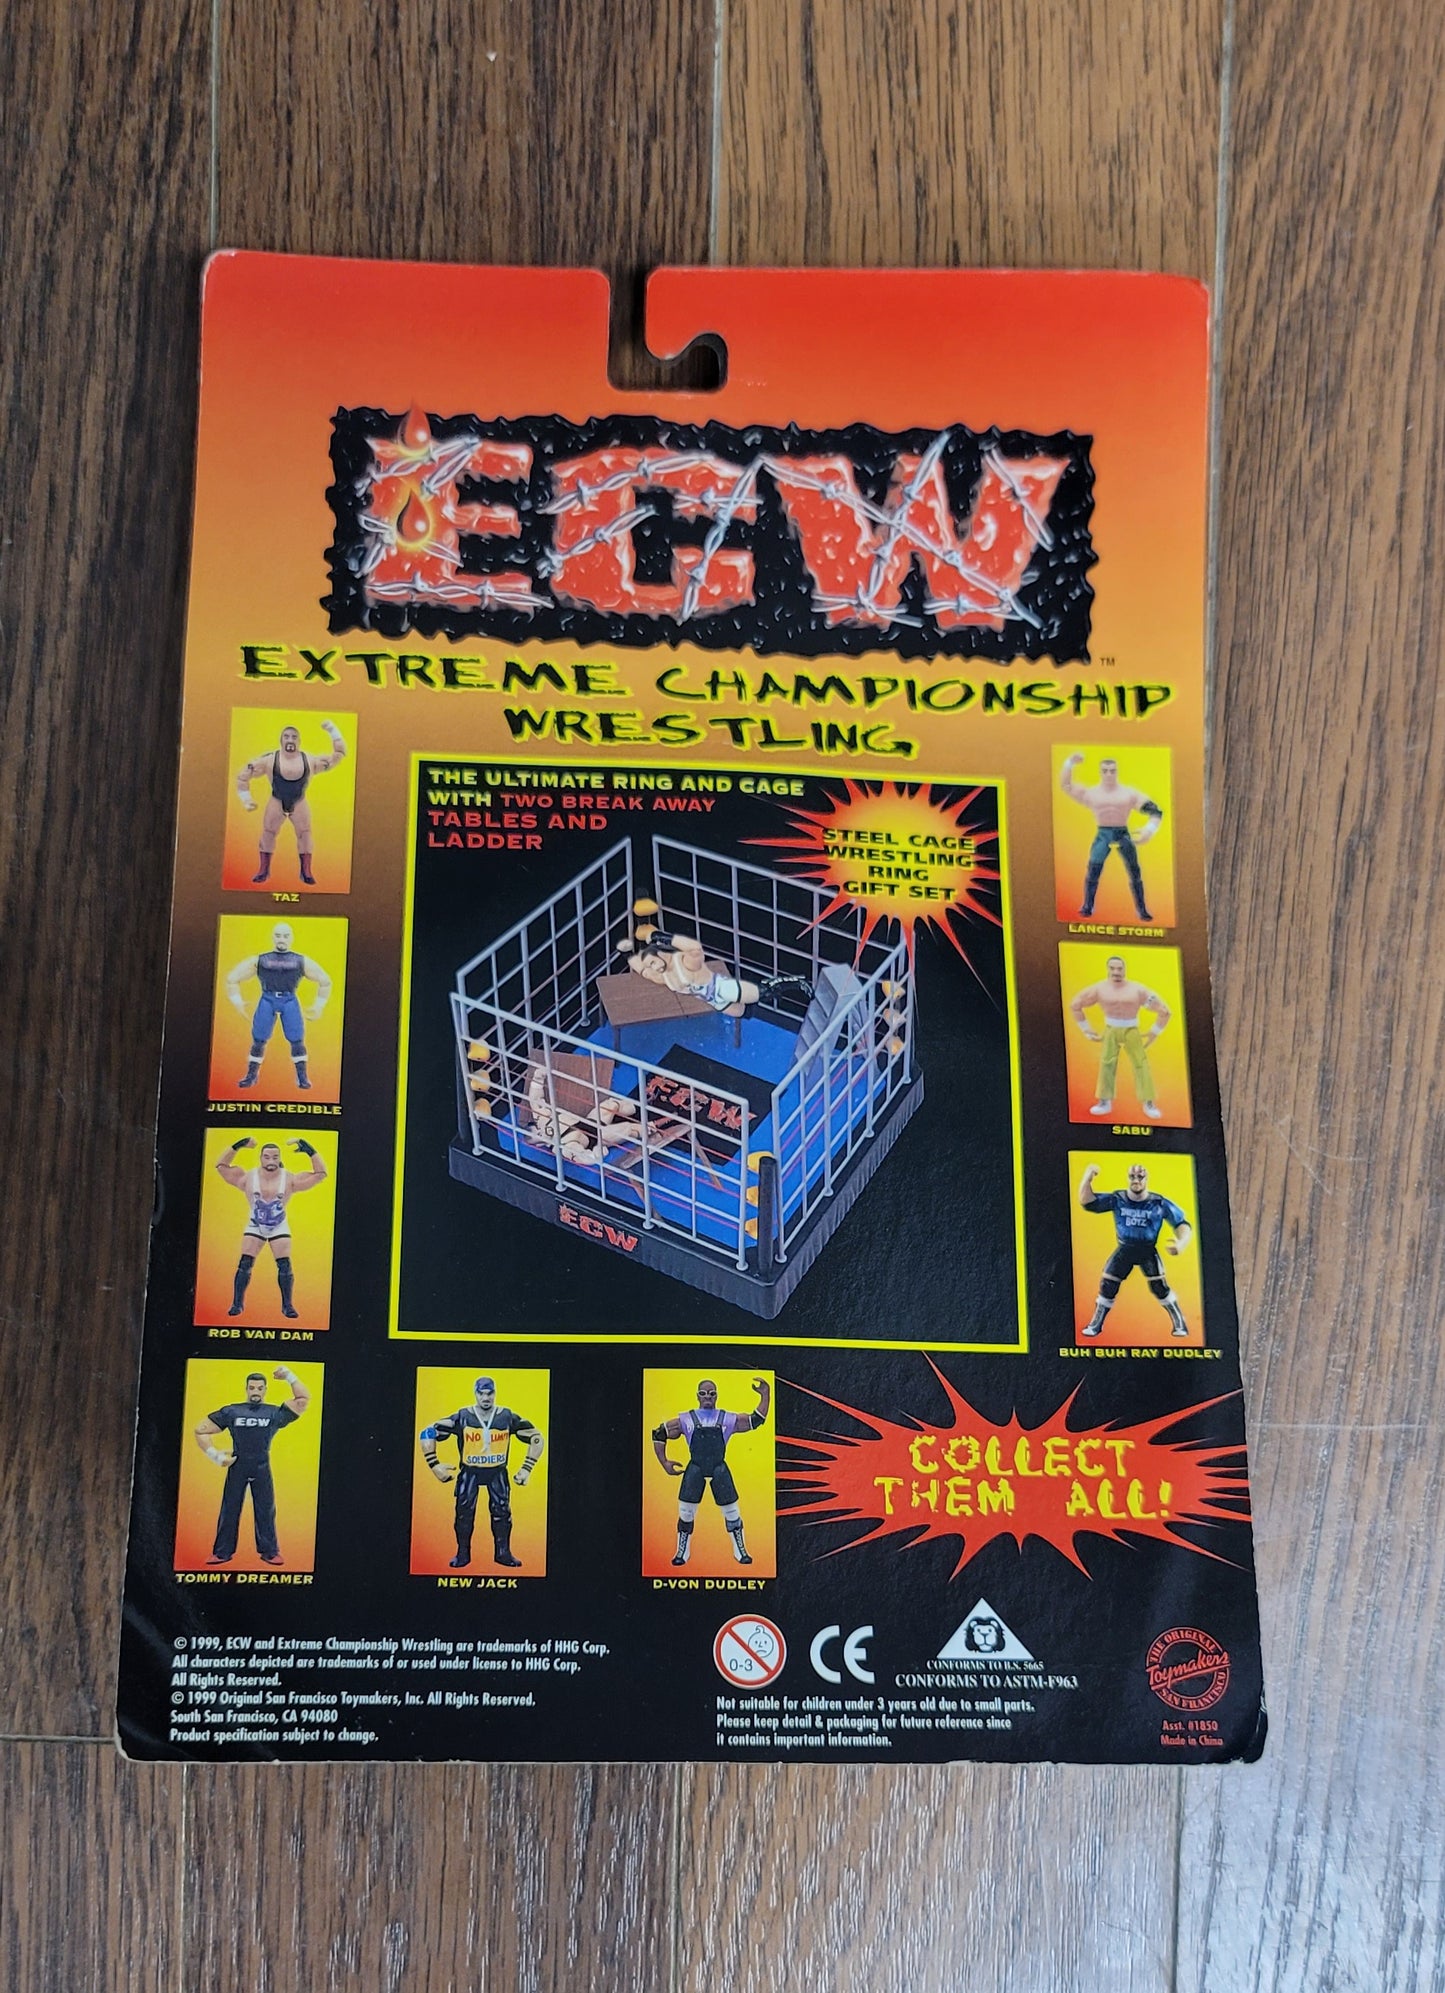 1999 Toy Makers ECW Tommy Dreamer Hardcore Wrestling Action Figure